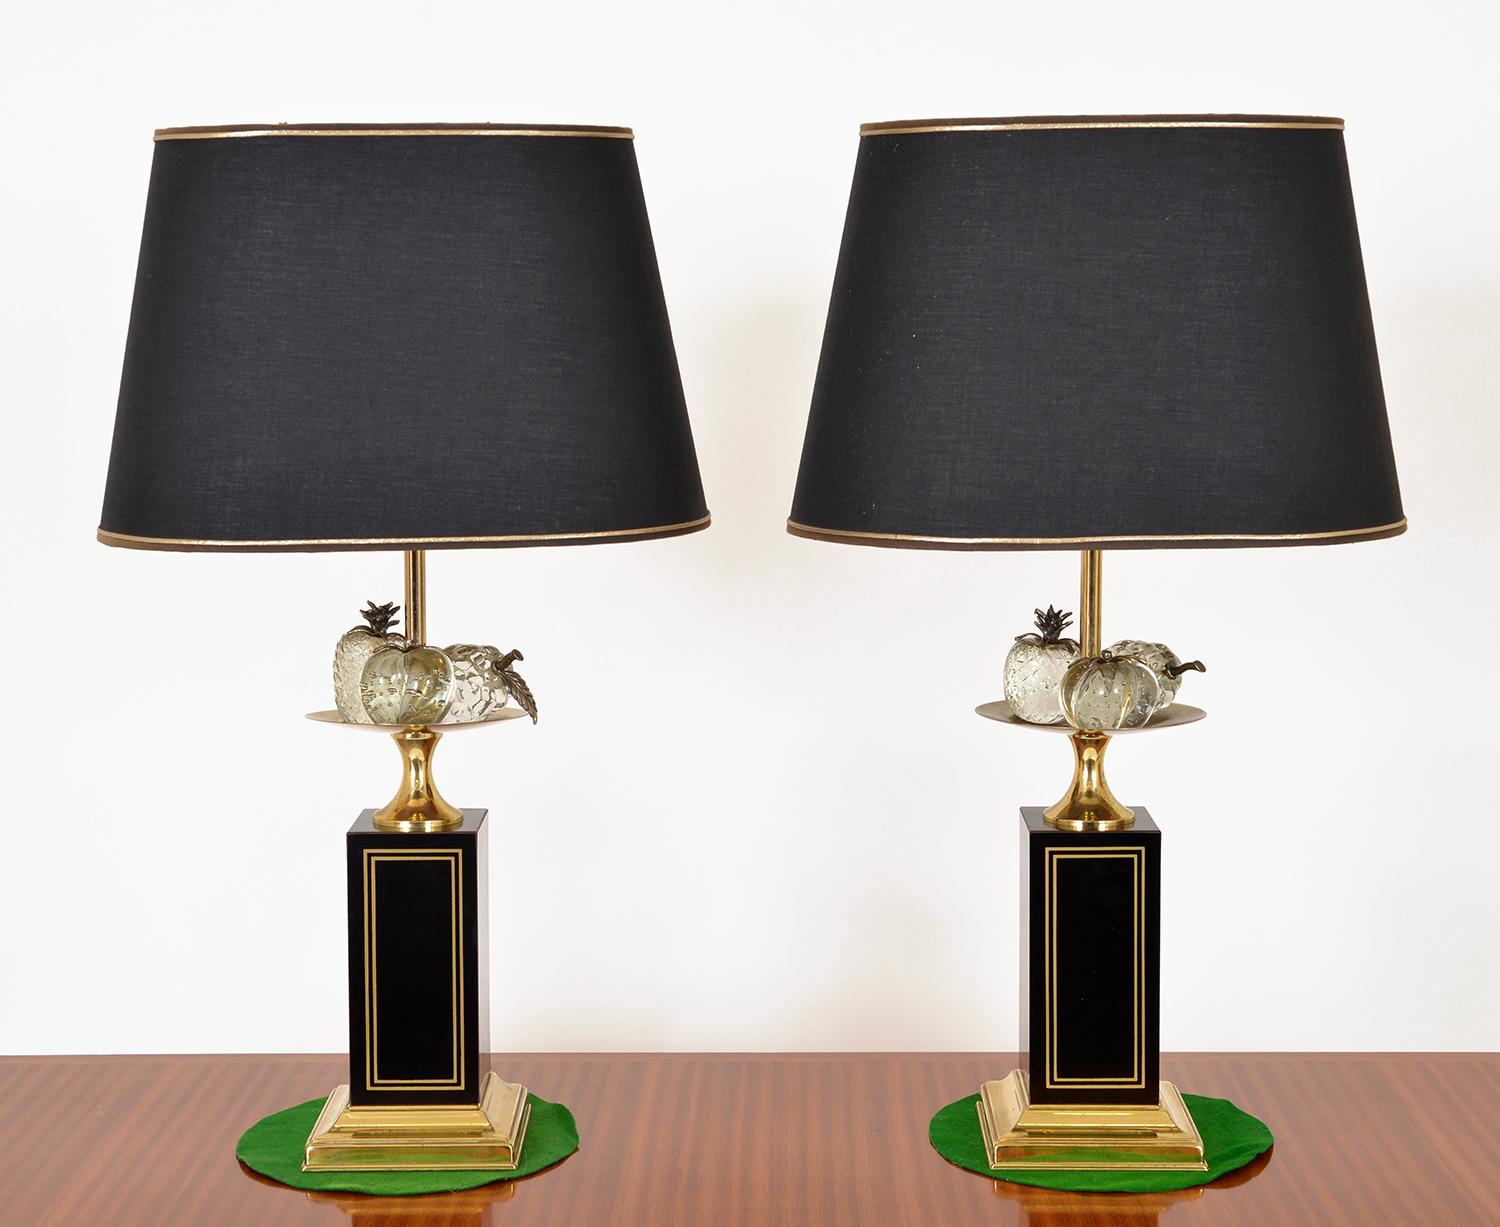 Stunning pair of tall decorative table lamps by Maison Charles, Paris. Raised square black enamelled columns with inlaid brass detail are raised on a stepped brass base. The column topped with a brass bowl holding beautifully cut crystal fruits with